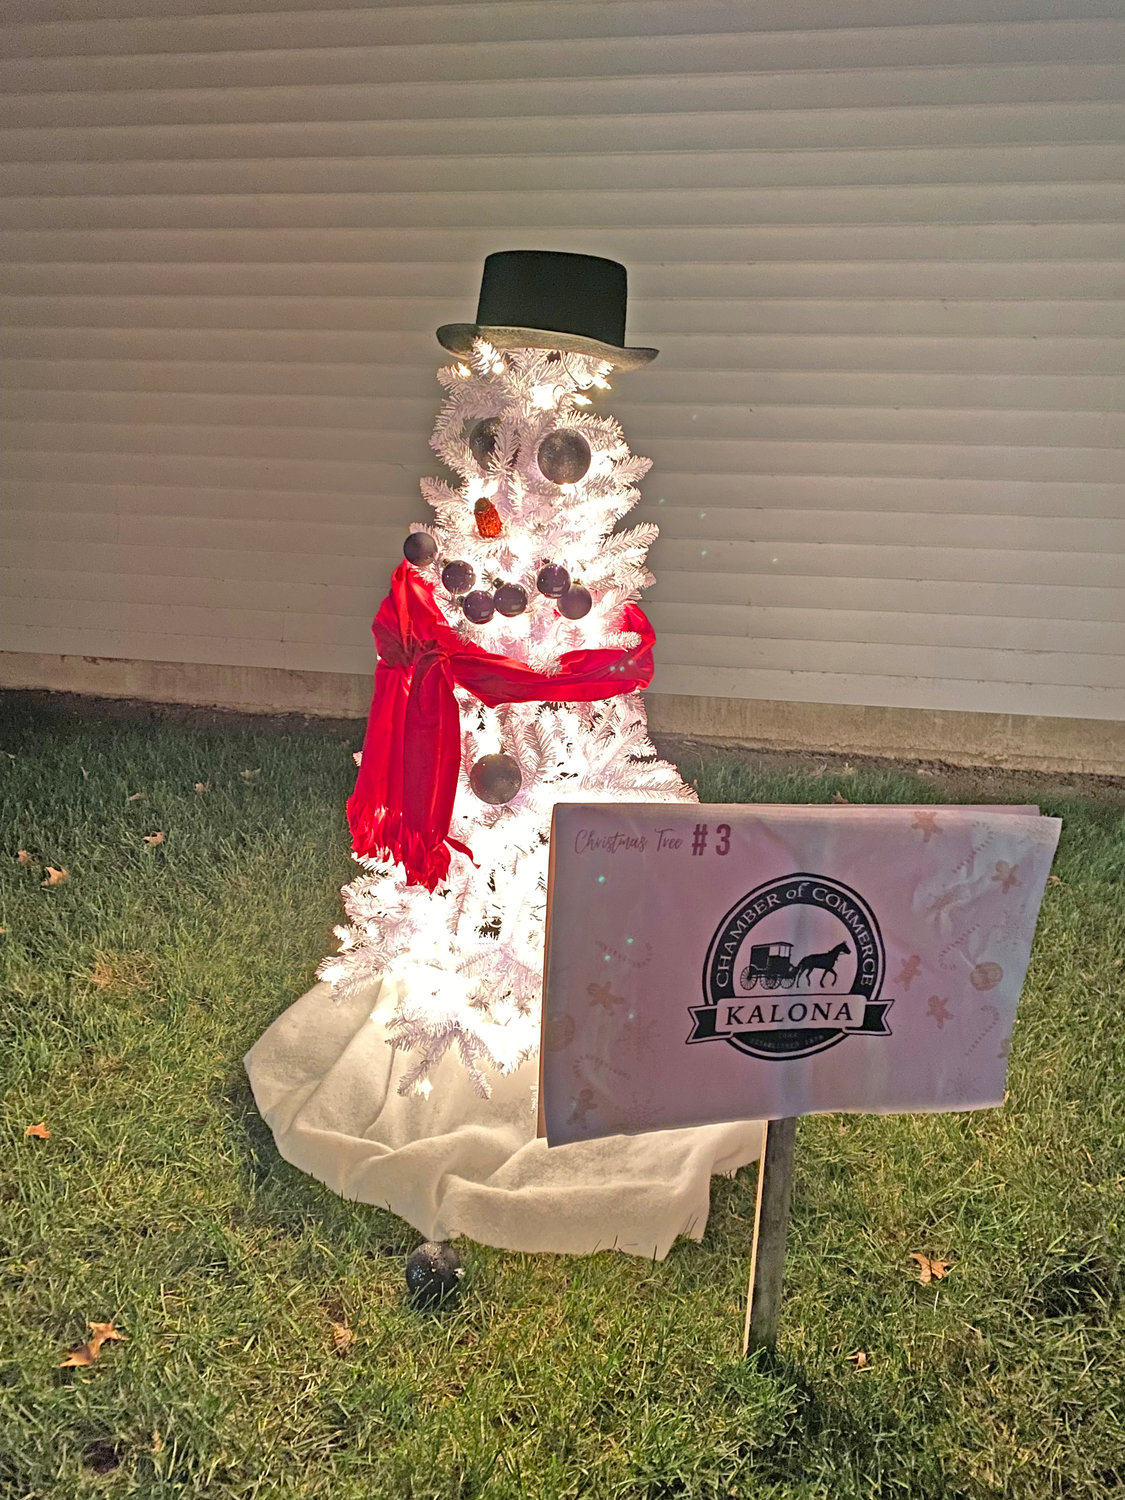 The Kalona Chamber of Commerce made a snowman tree.